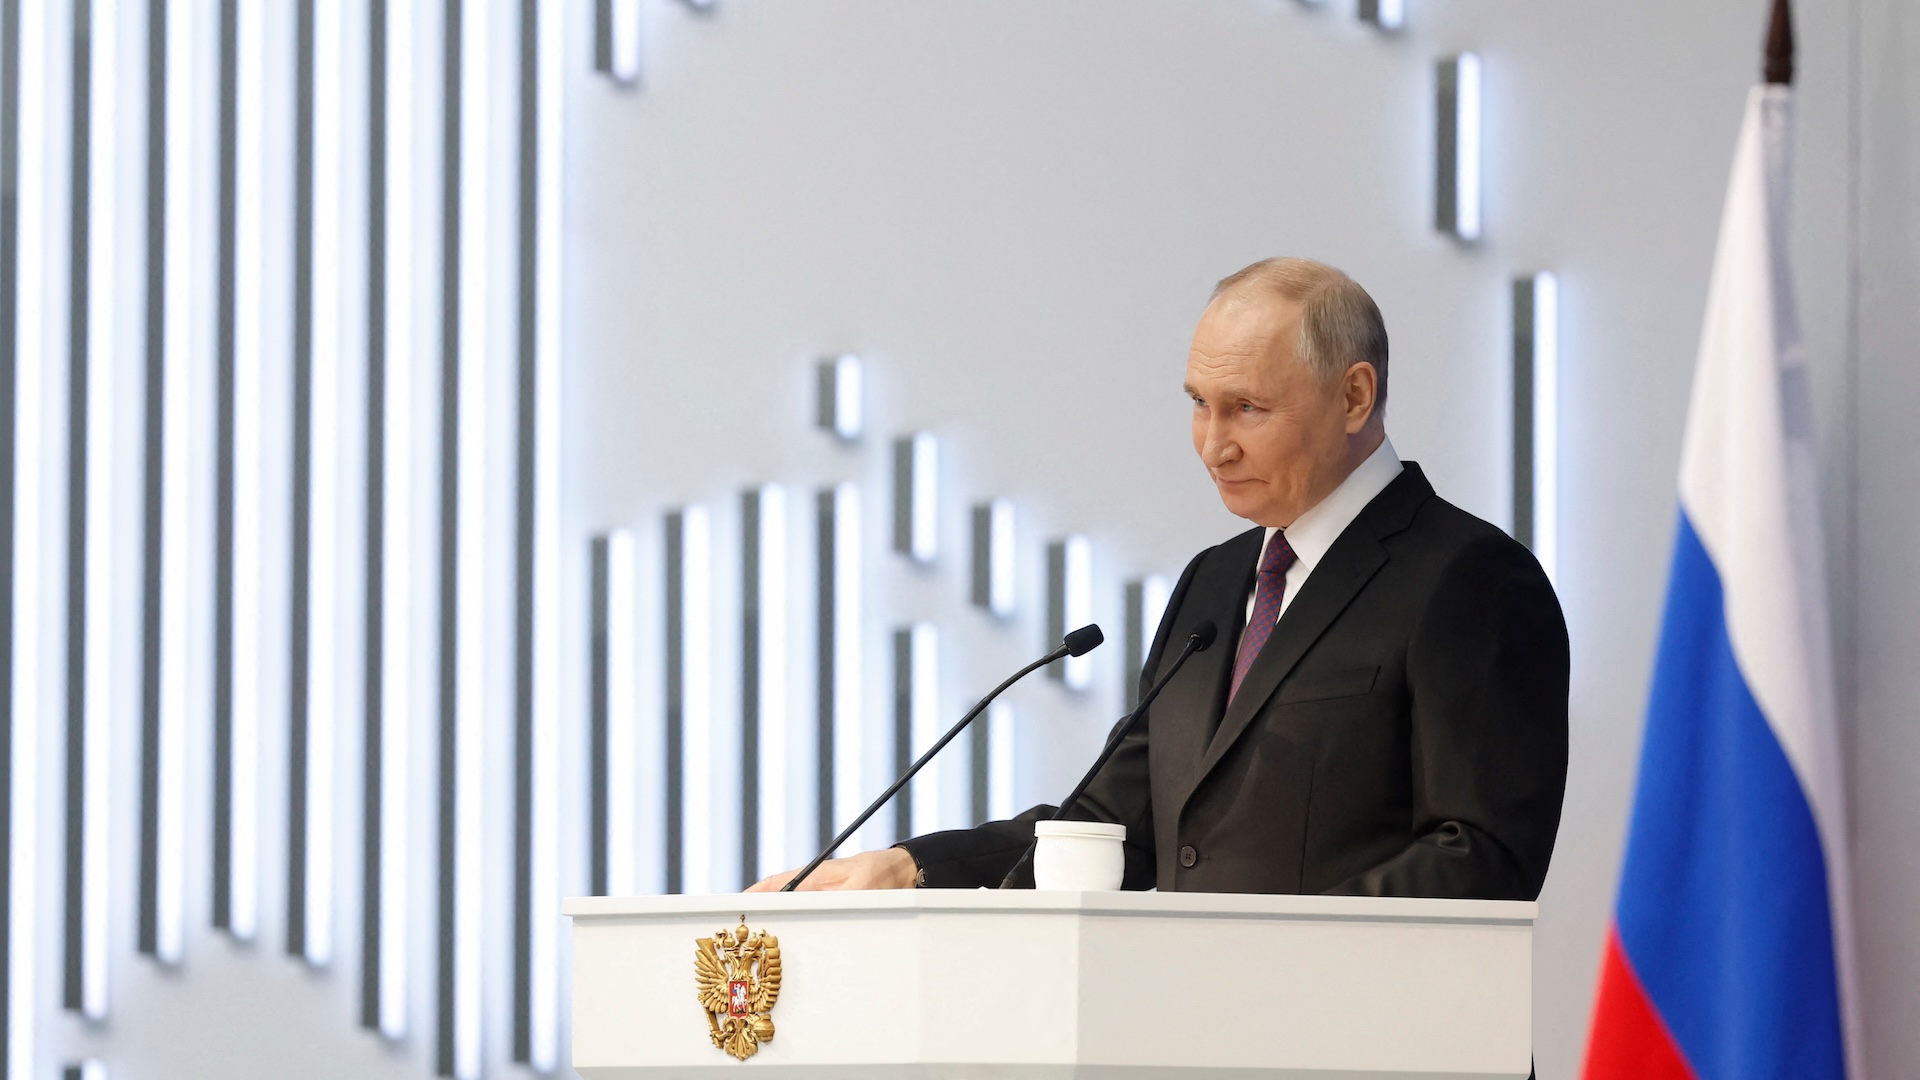 Putin threatens nuclear response to NATO troops if they go to Ukraine